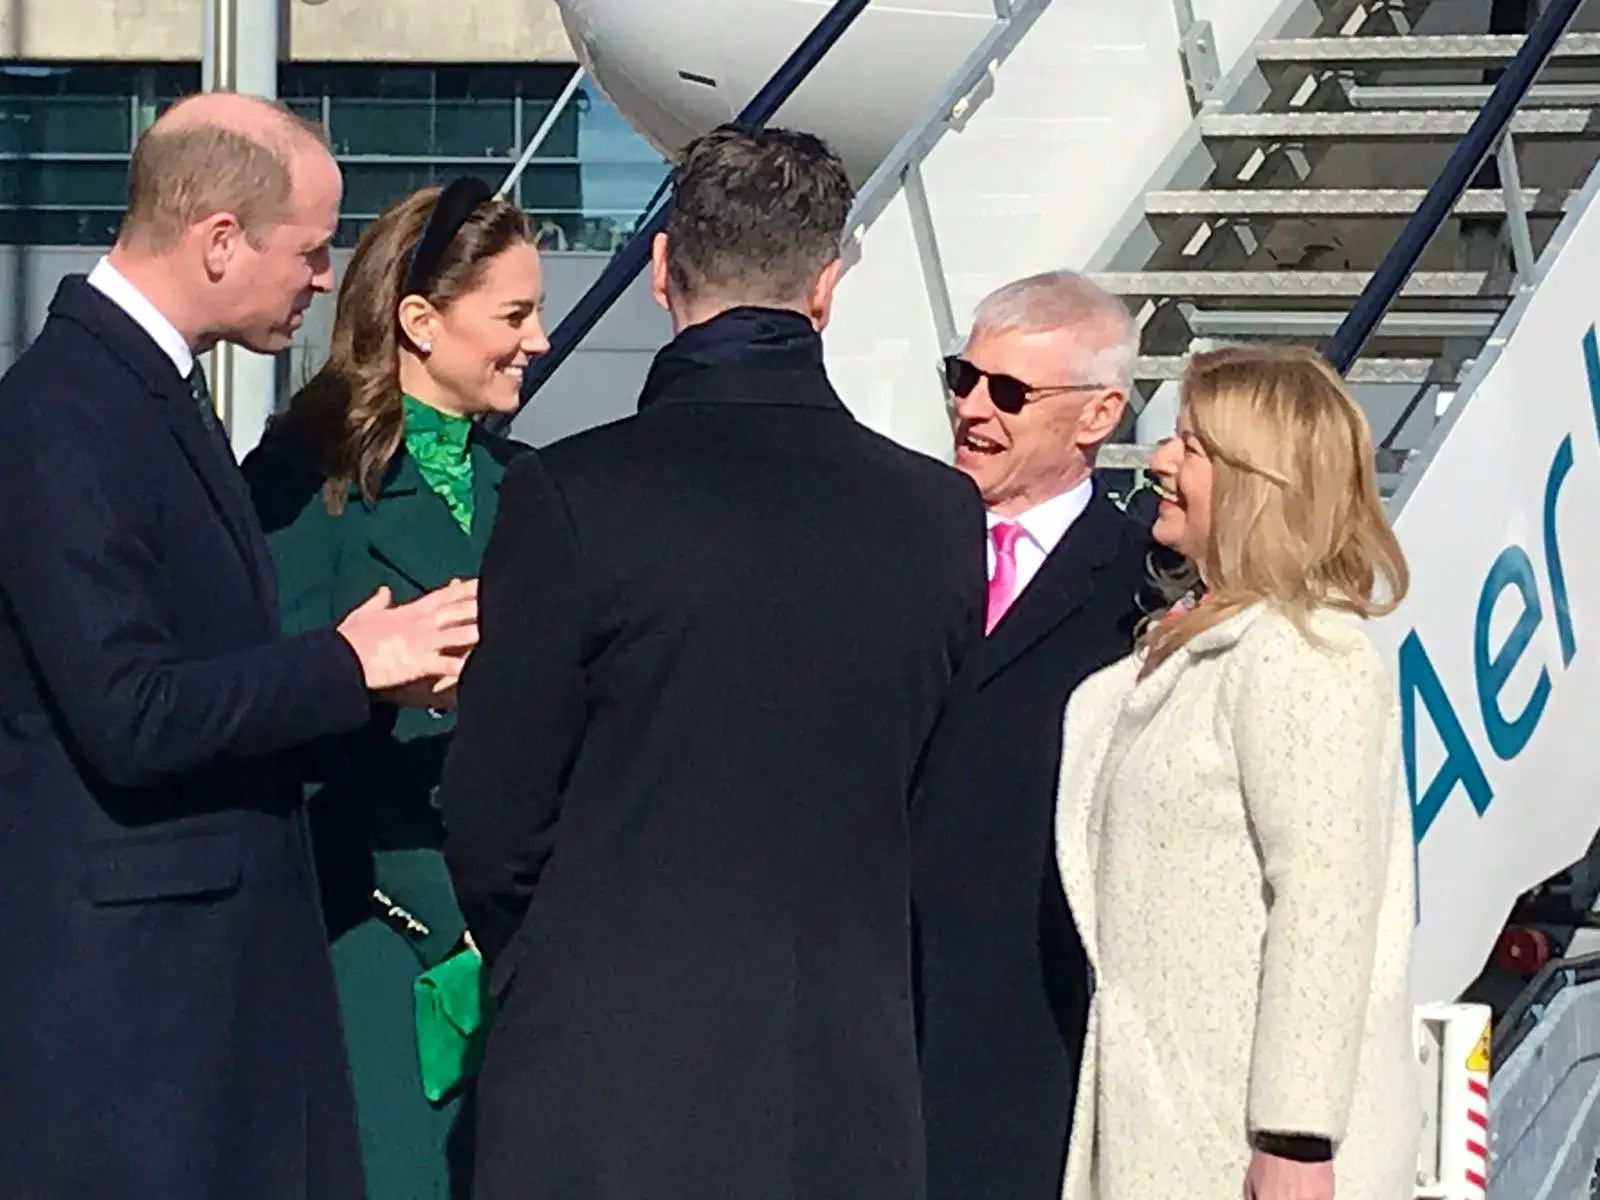 The Duke and Duchess of Cambridge arrived in Ireland for Day one 